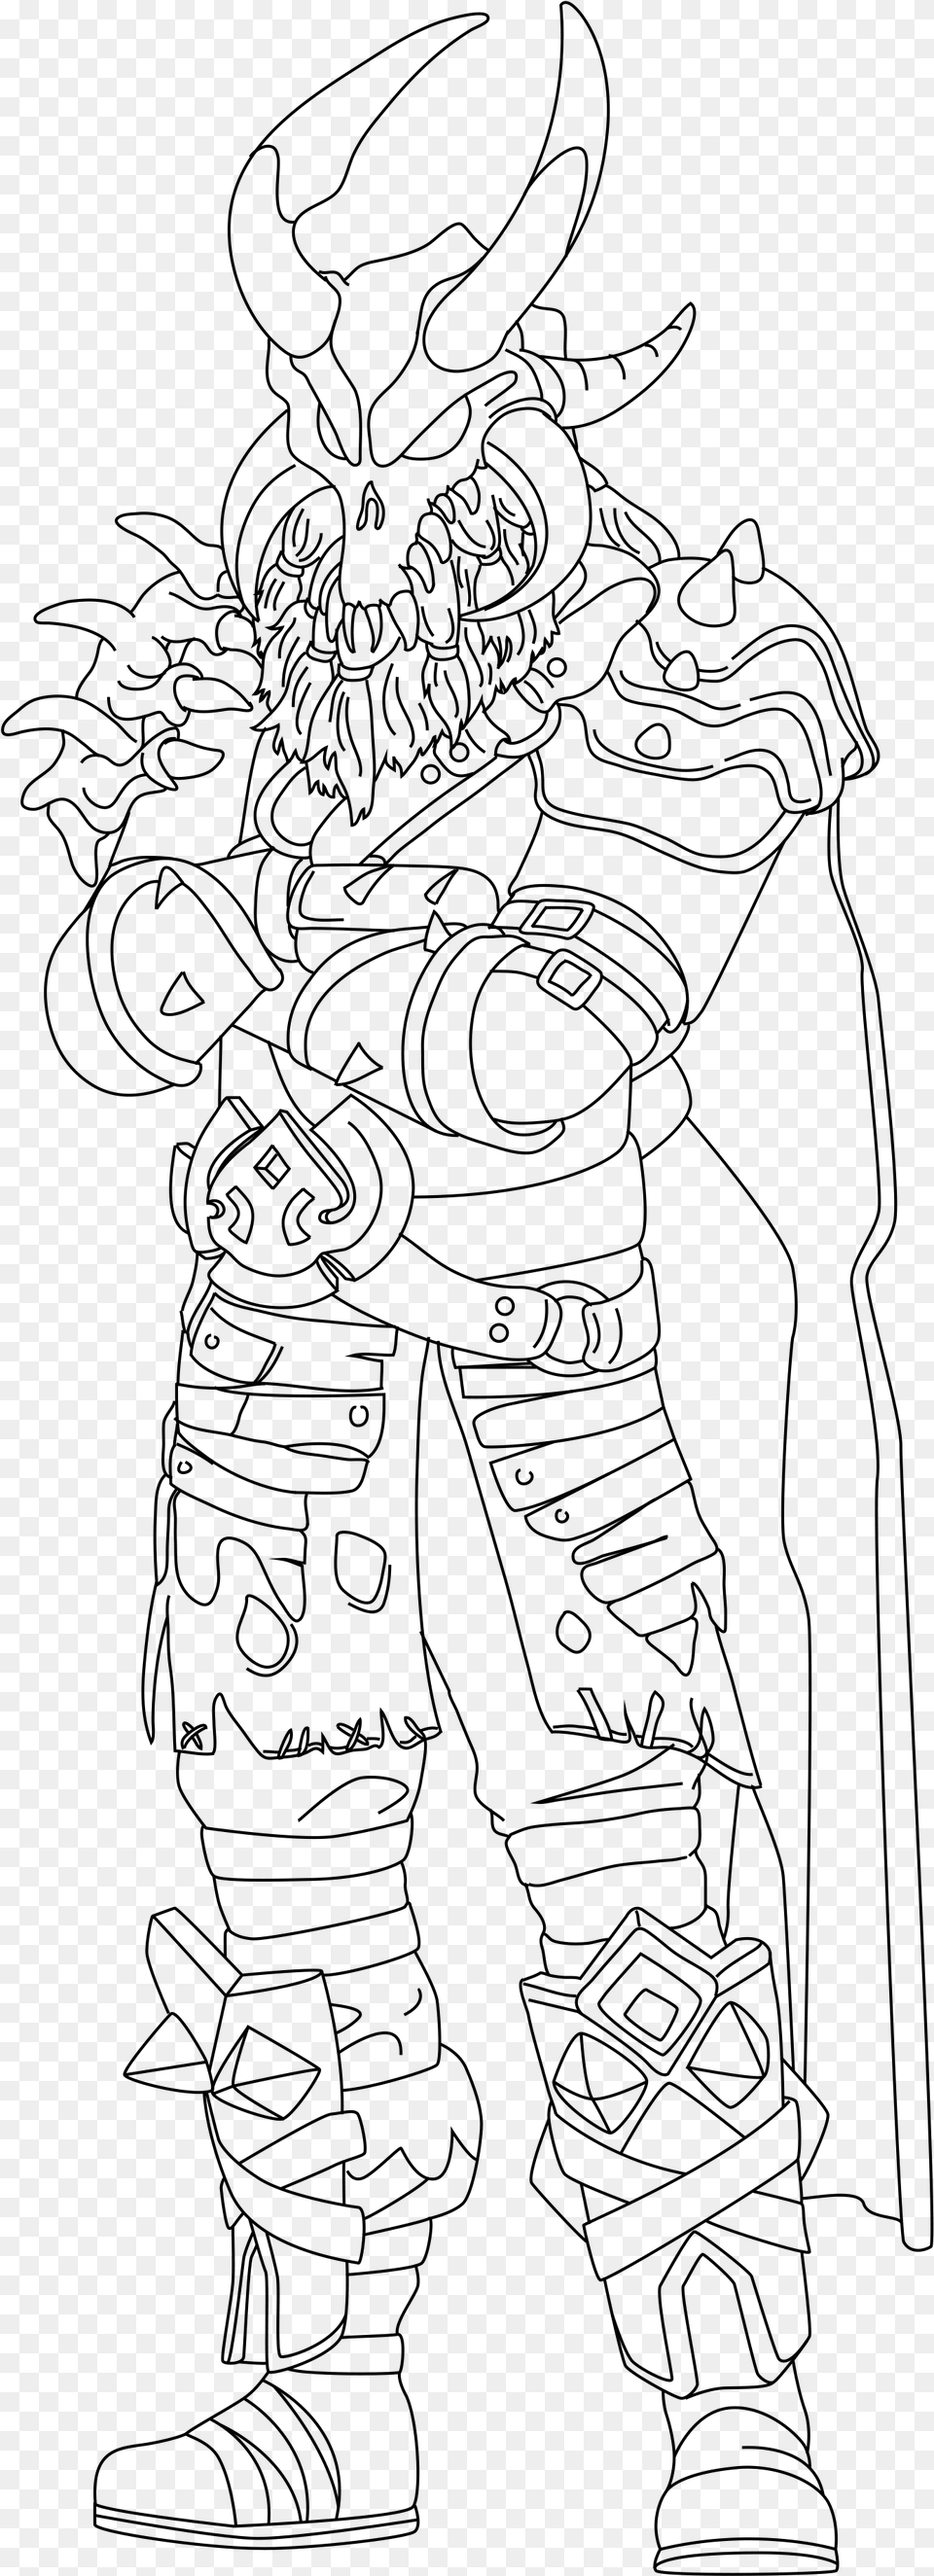 Ragnarok Fortnite Coloring Pages, Gray Png